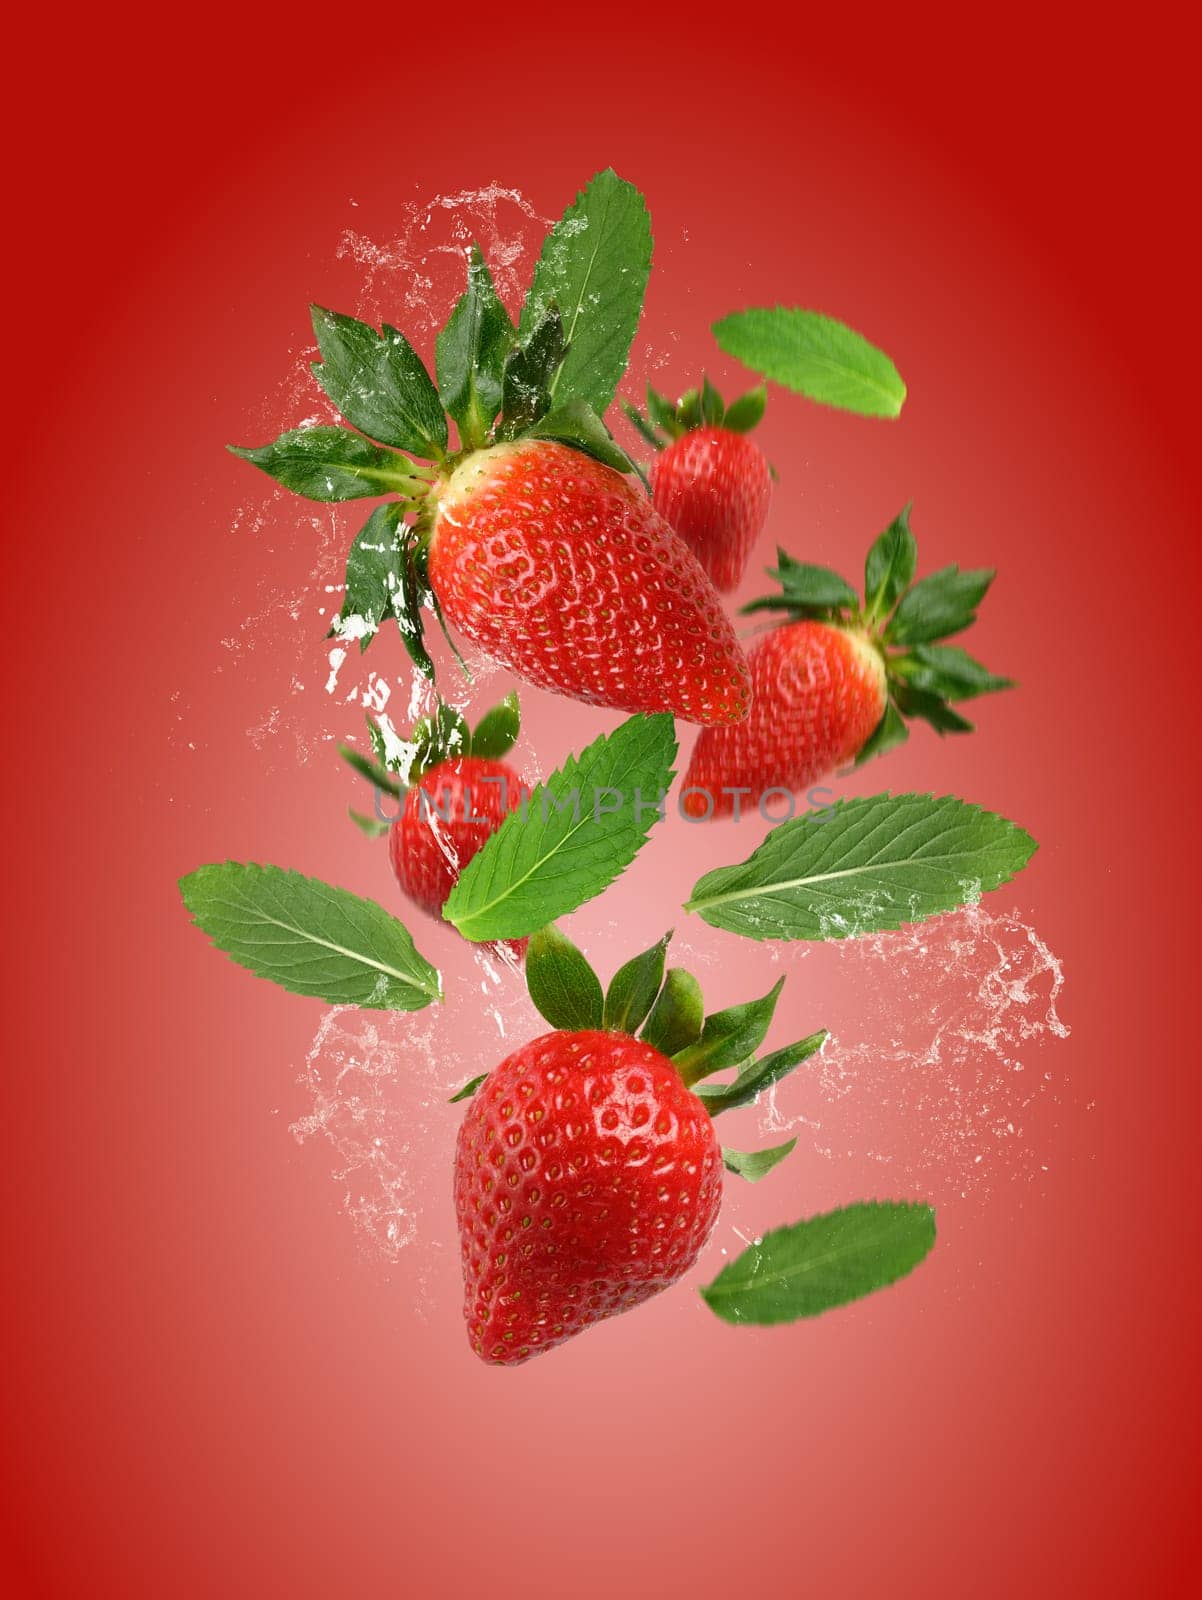 Red ripe strawberry on ia red background. Berries and mint leaves levitate